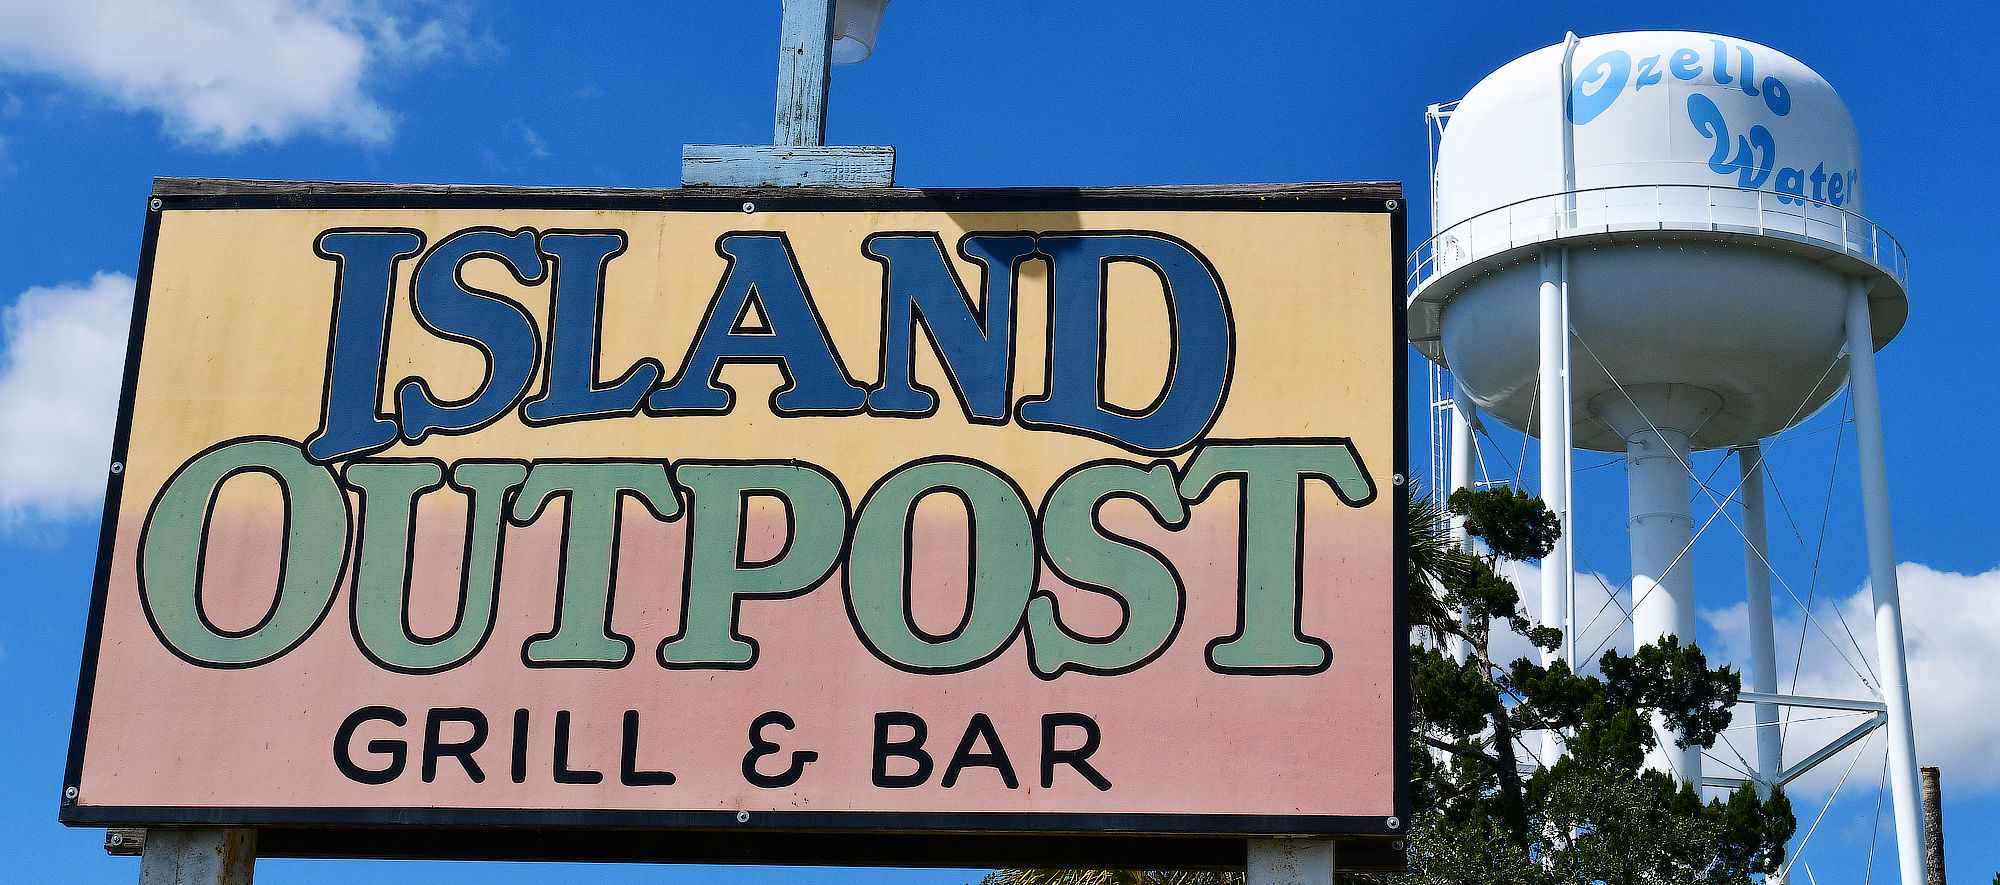 Ozello Island Outpost is a perfect 